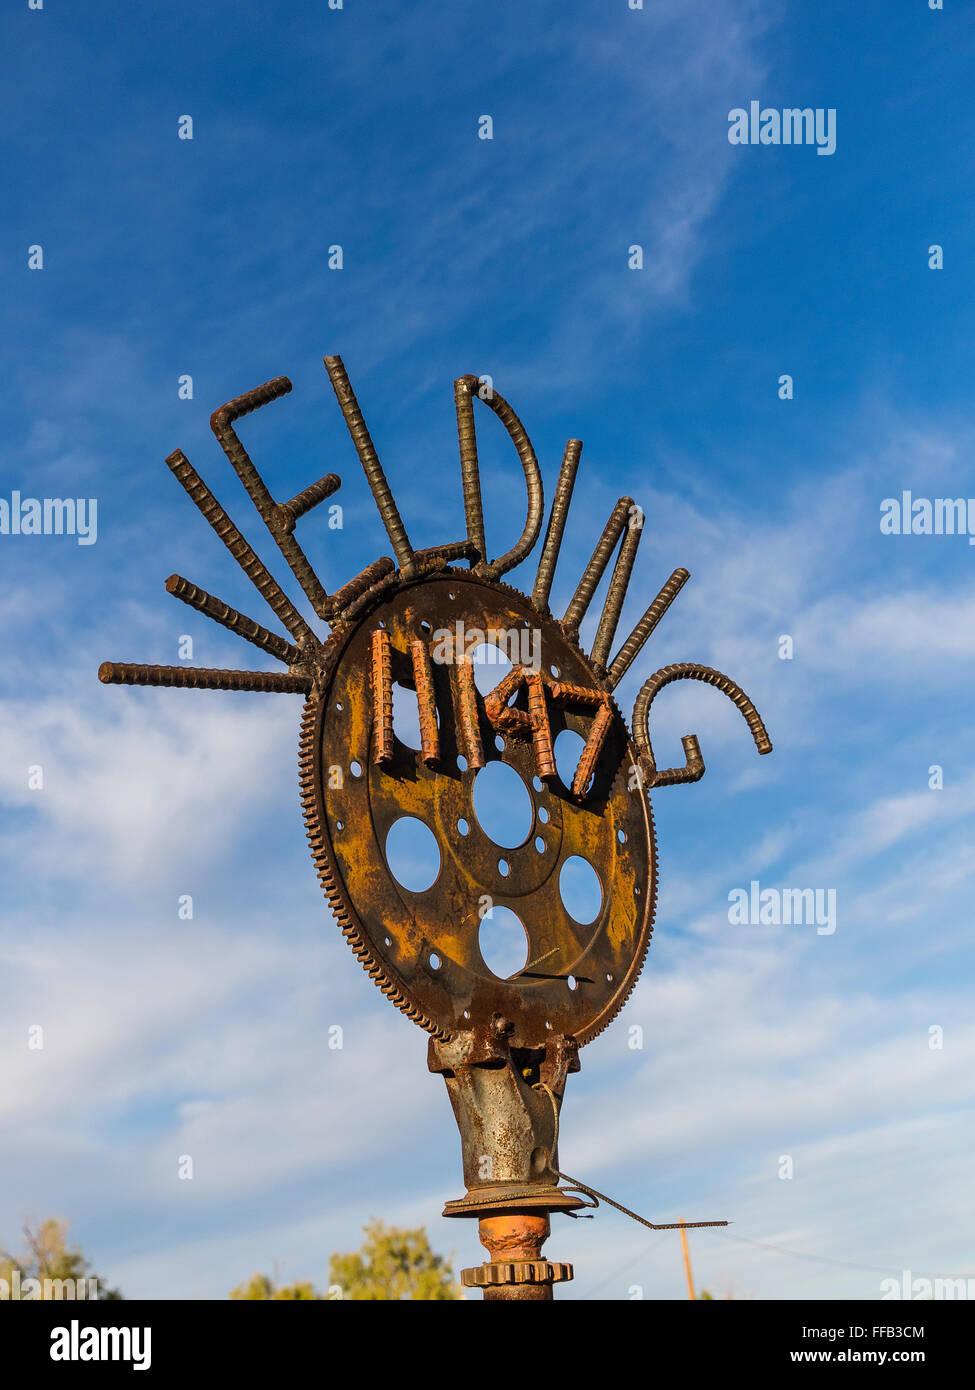 A clever metal welded sign with an address on it advertising a welder's shop in Morongo, California. Stock Photo